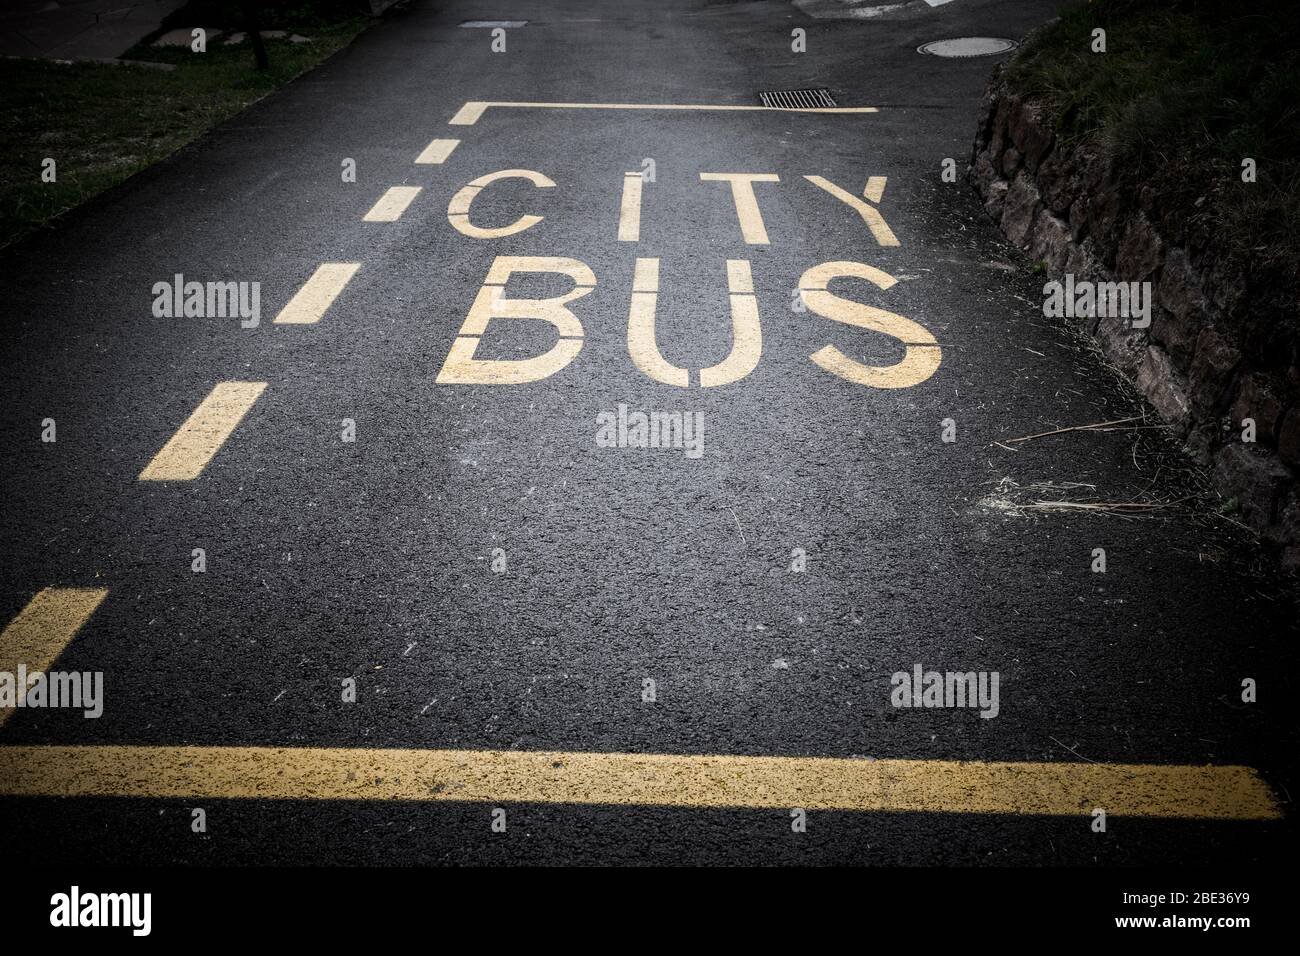 City Bus stop sign painted in yellow on a black tarmac road, Italy. Stock Photo